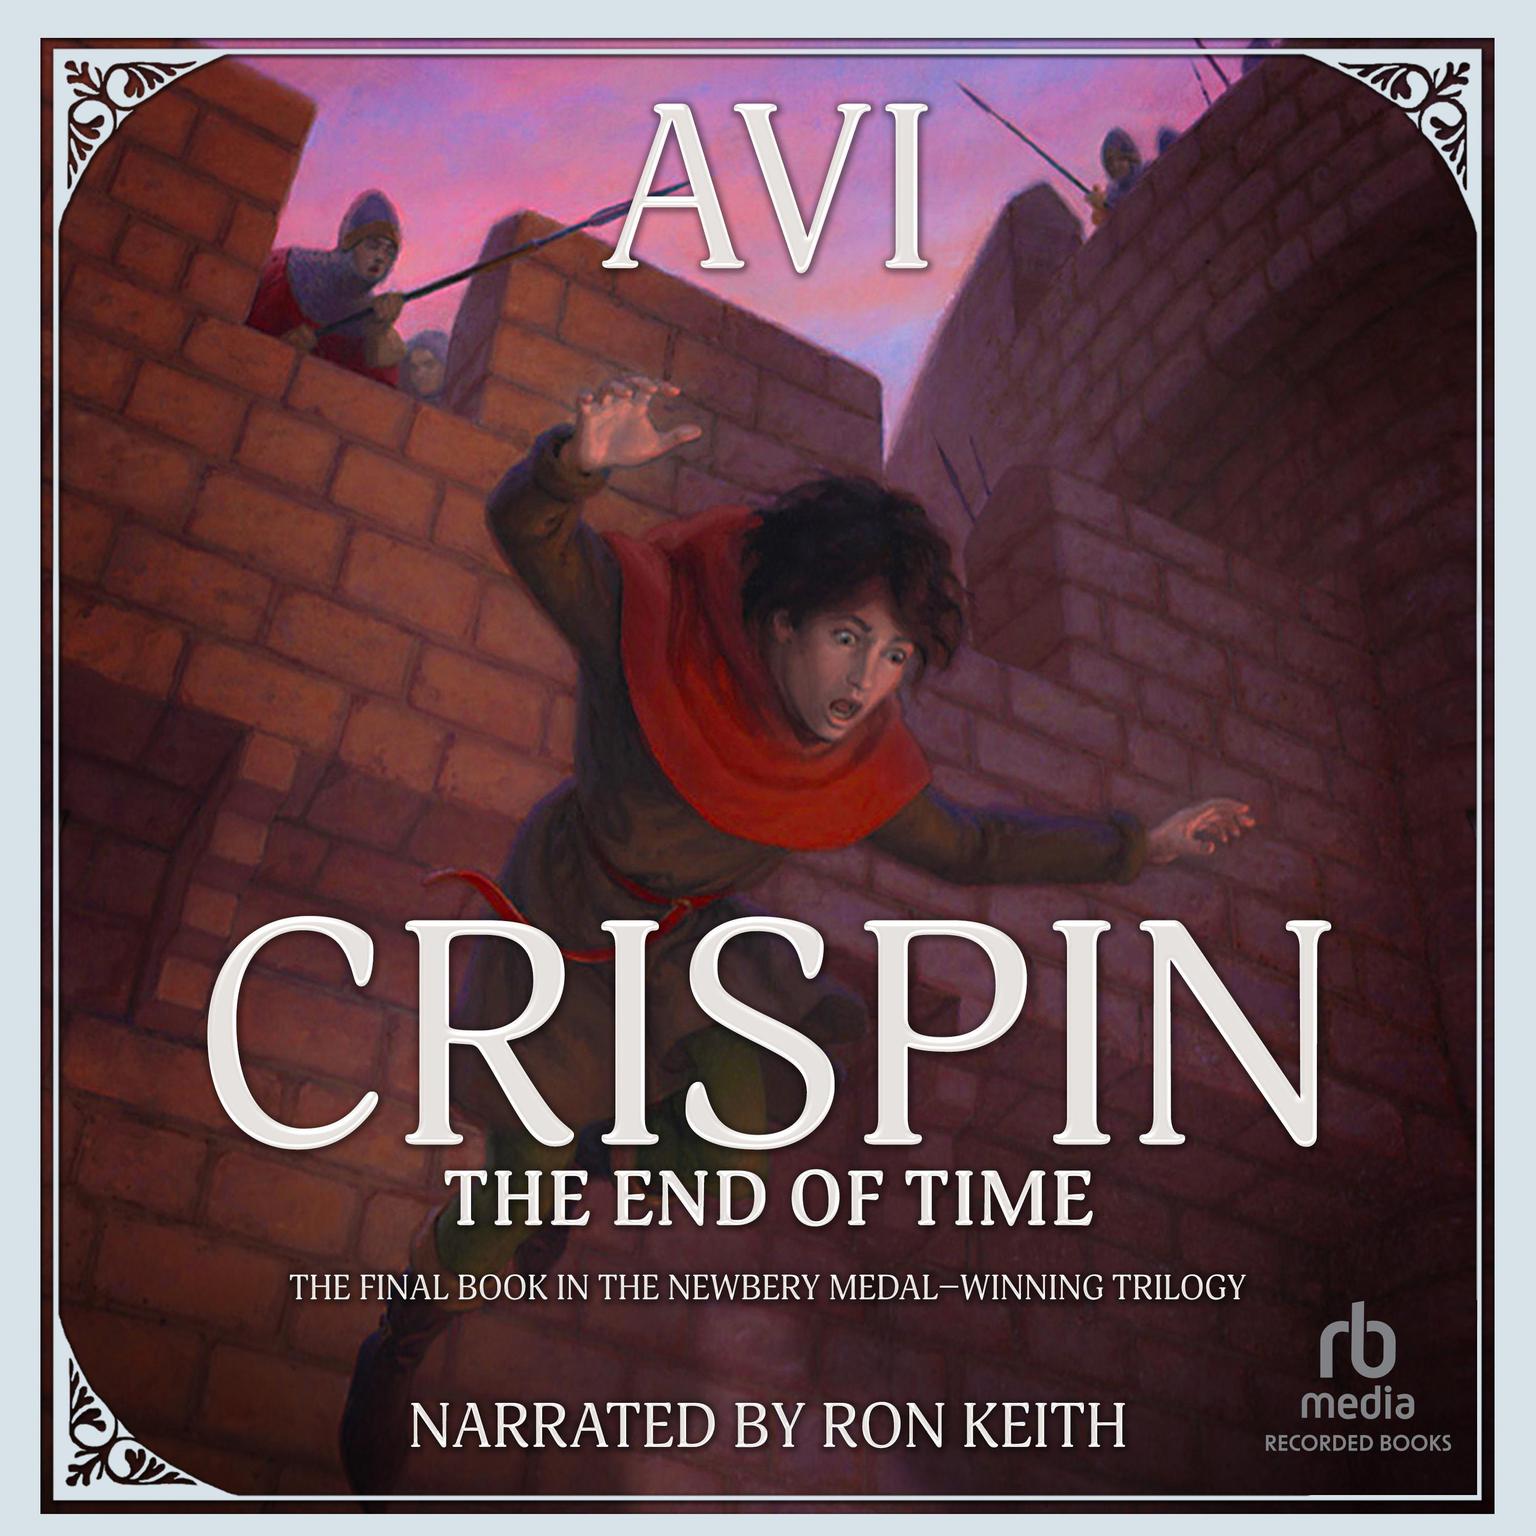 Crispin: The End of Time Audiobook, by Avi